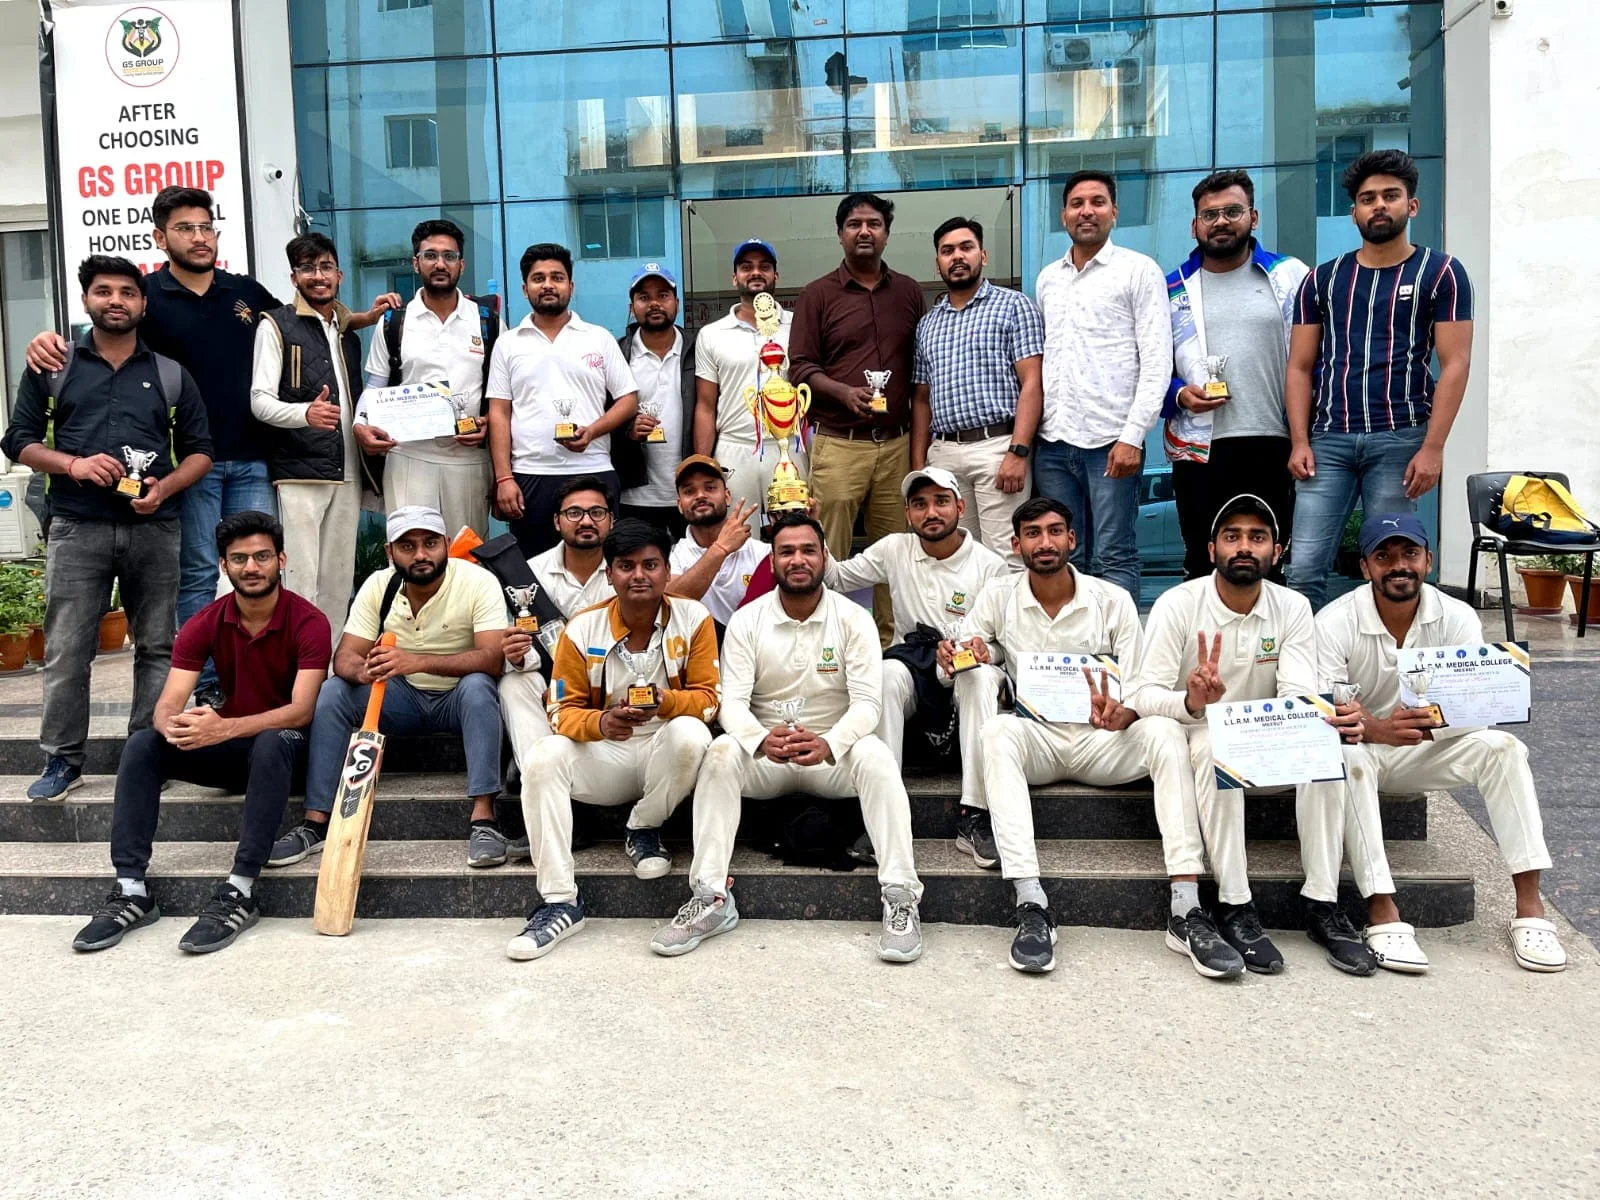 21 people standing with one cricket bat and one trophy